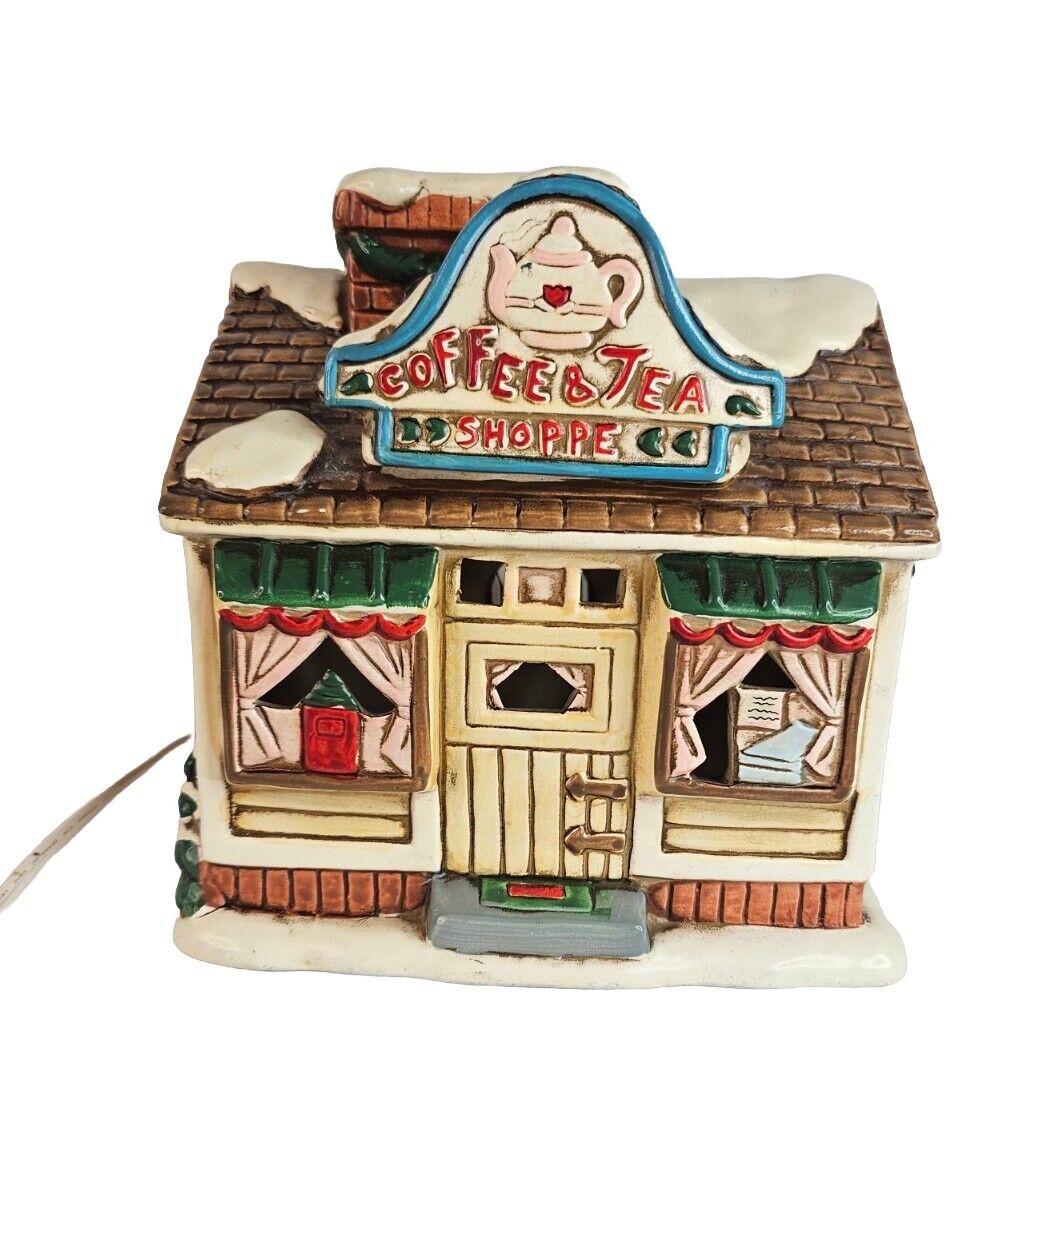 LEFTON 1989 “COFFEE And Tea SHOPPE” Hand Painted Light up Christmas Store